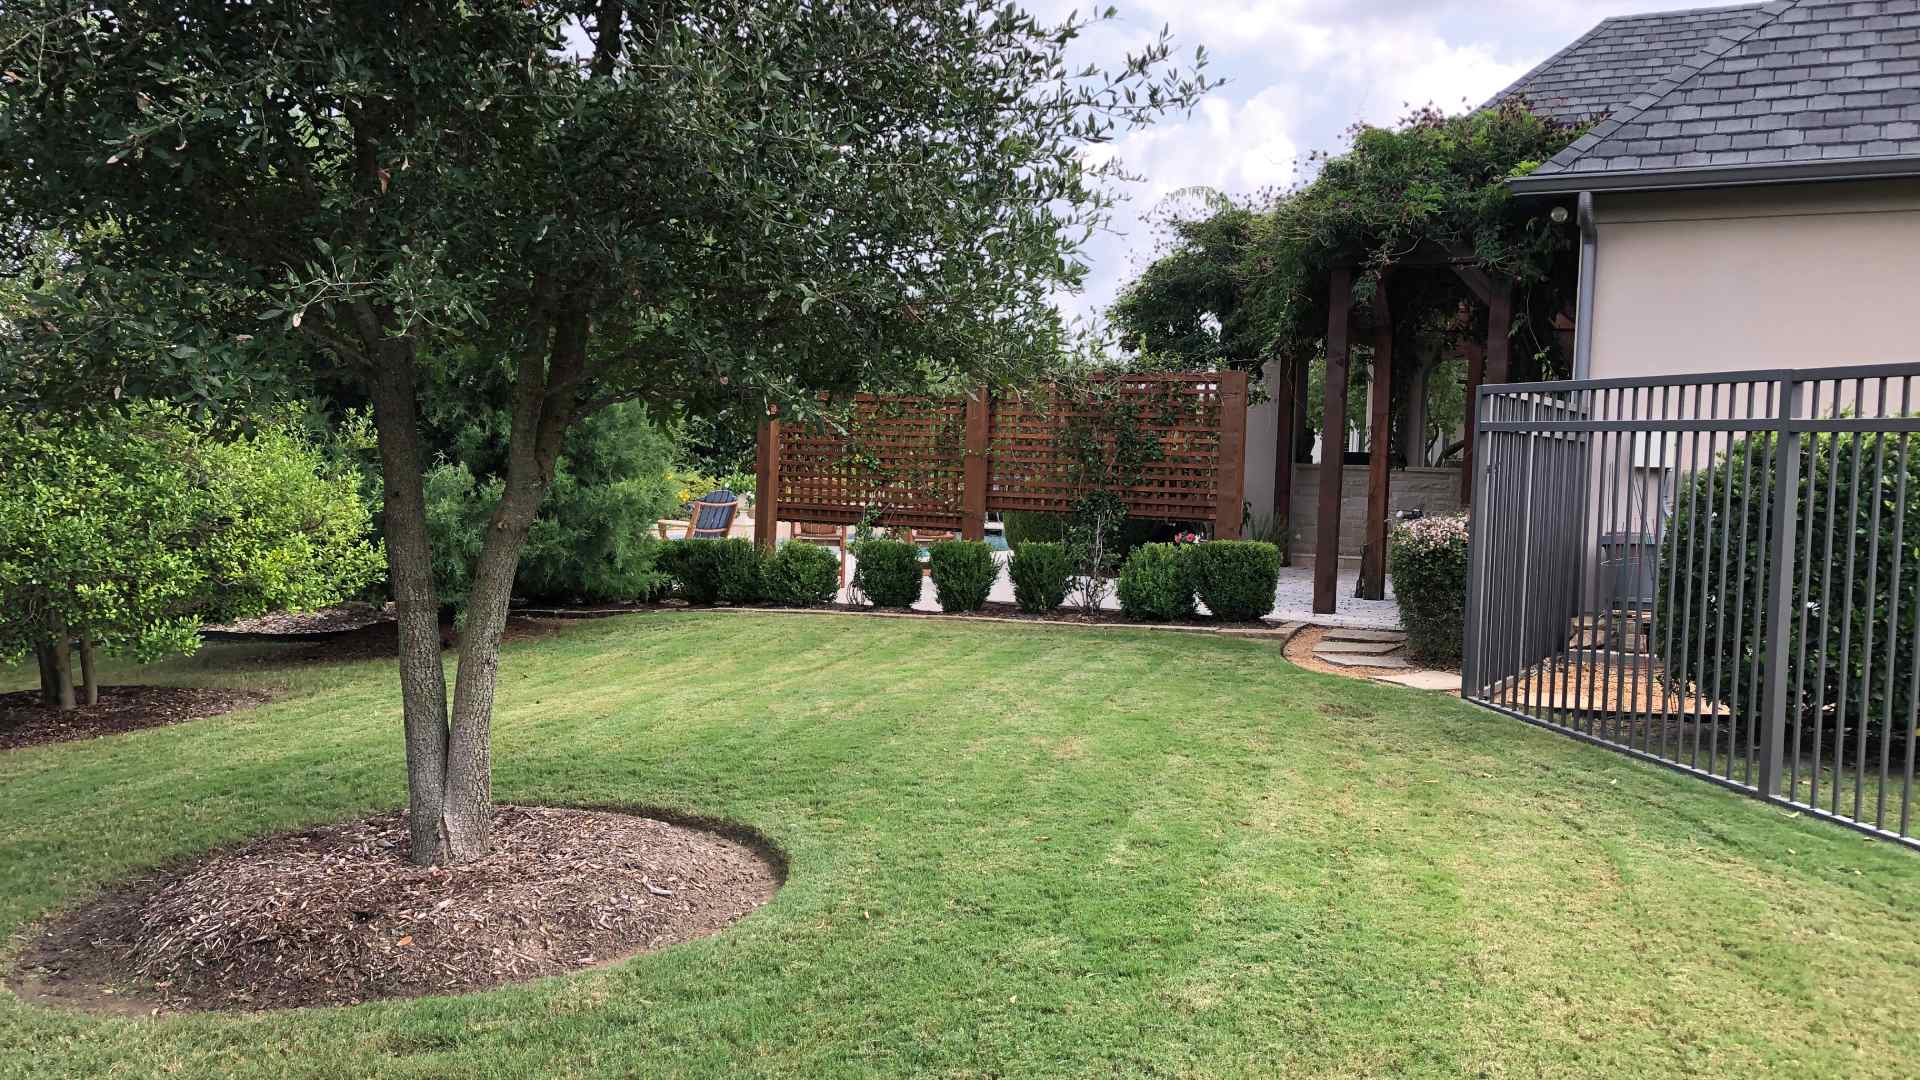 Maintained lawn freshly mowed by professionals in The Colony, TX.